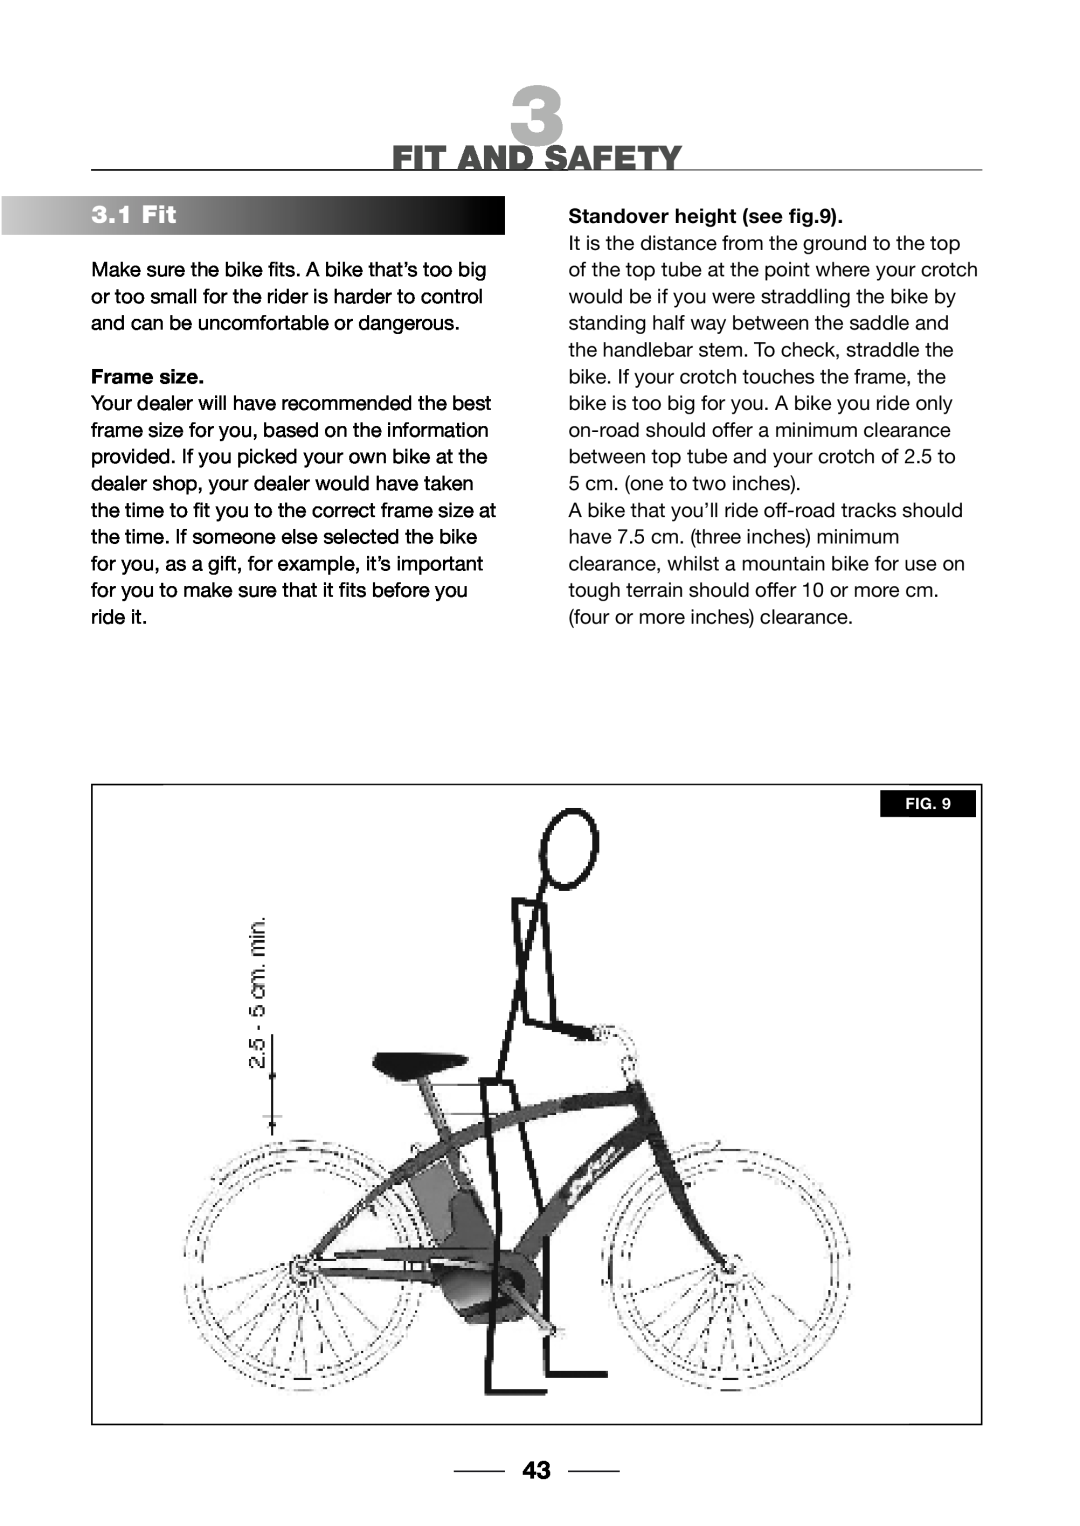 Giant 2002 Motorized Bicycle owner manual Fit And Safety, 3.1Fit, Frame size, Standover height see 